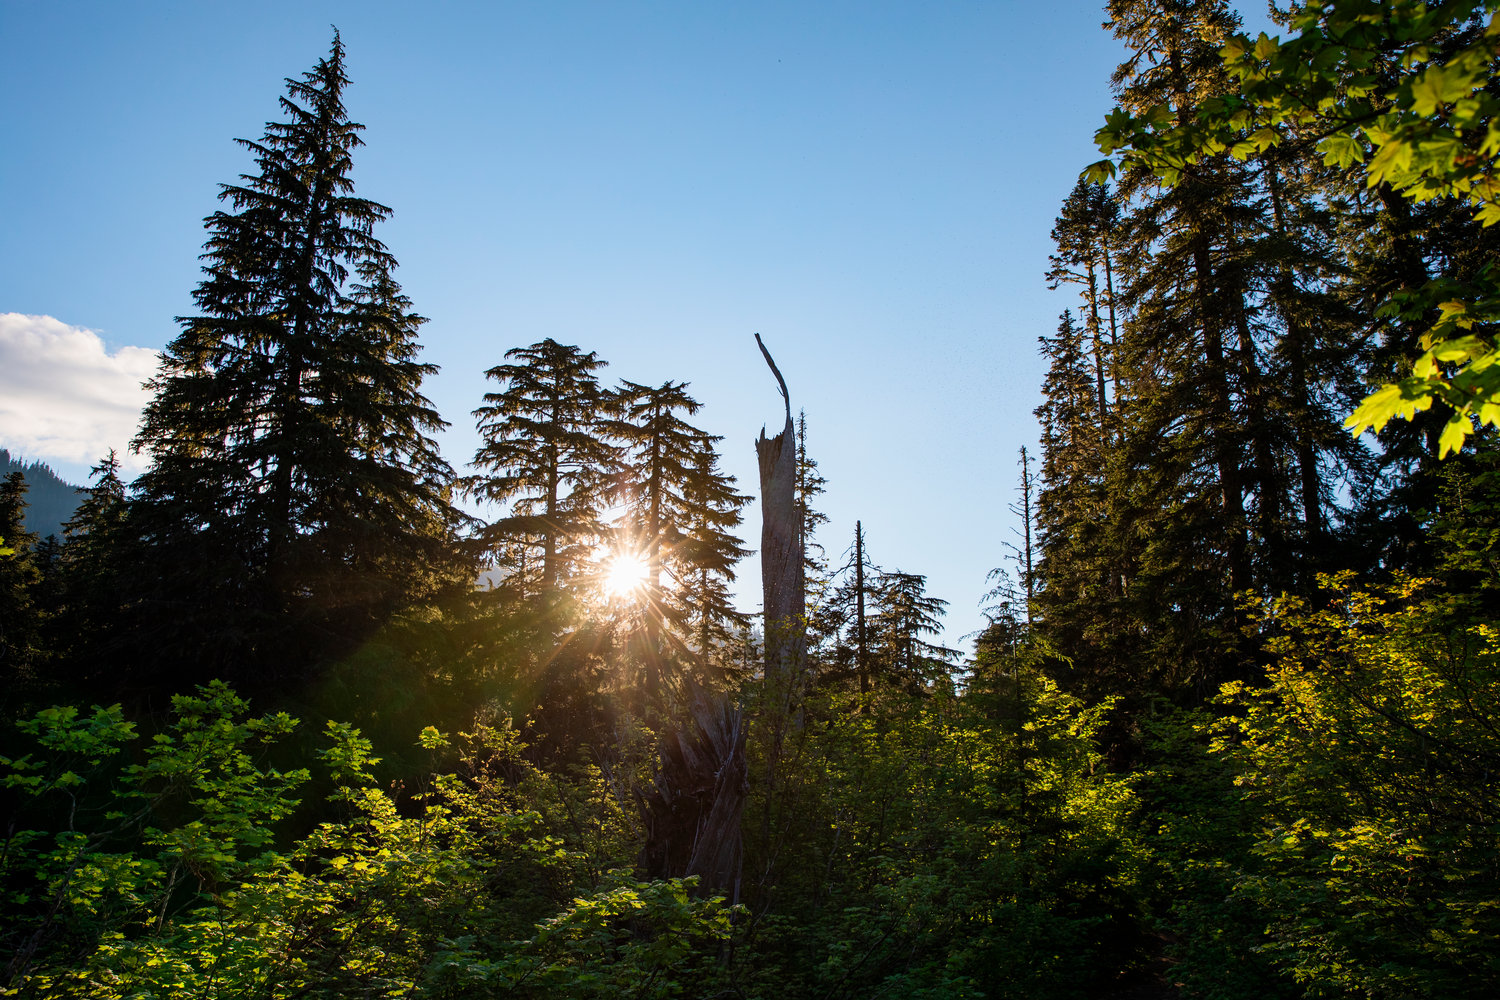 The sun shines through trees in the Gifford Pinchot National Forest on Wednesday.